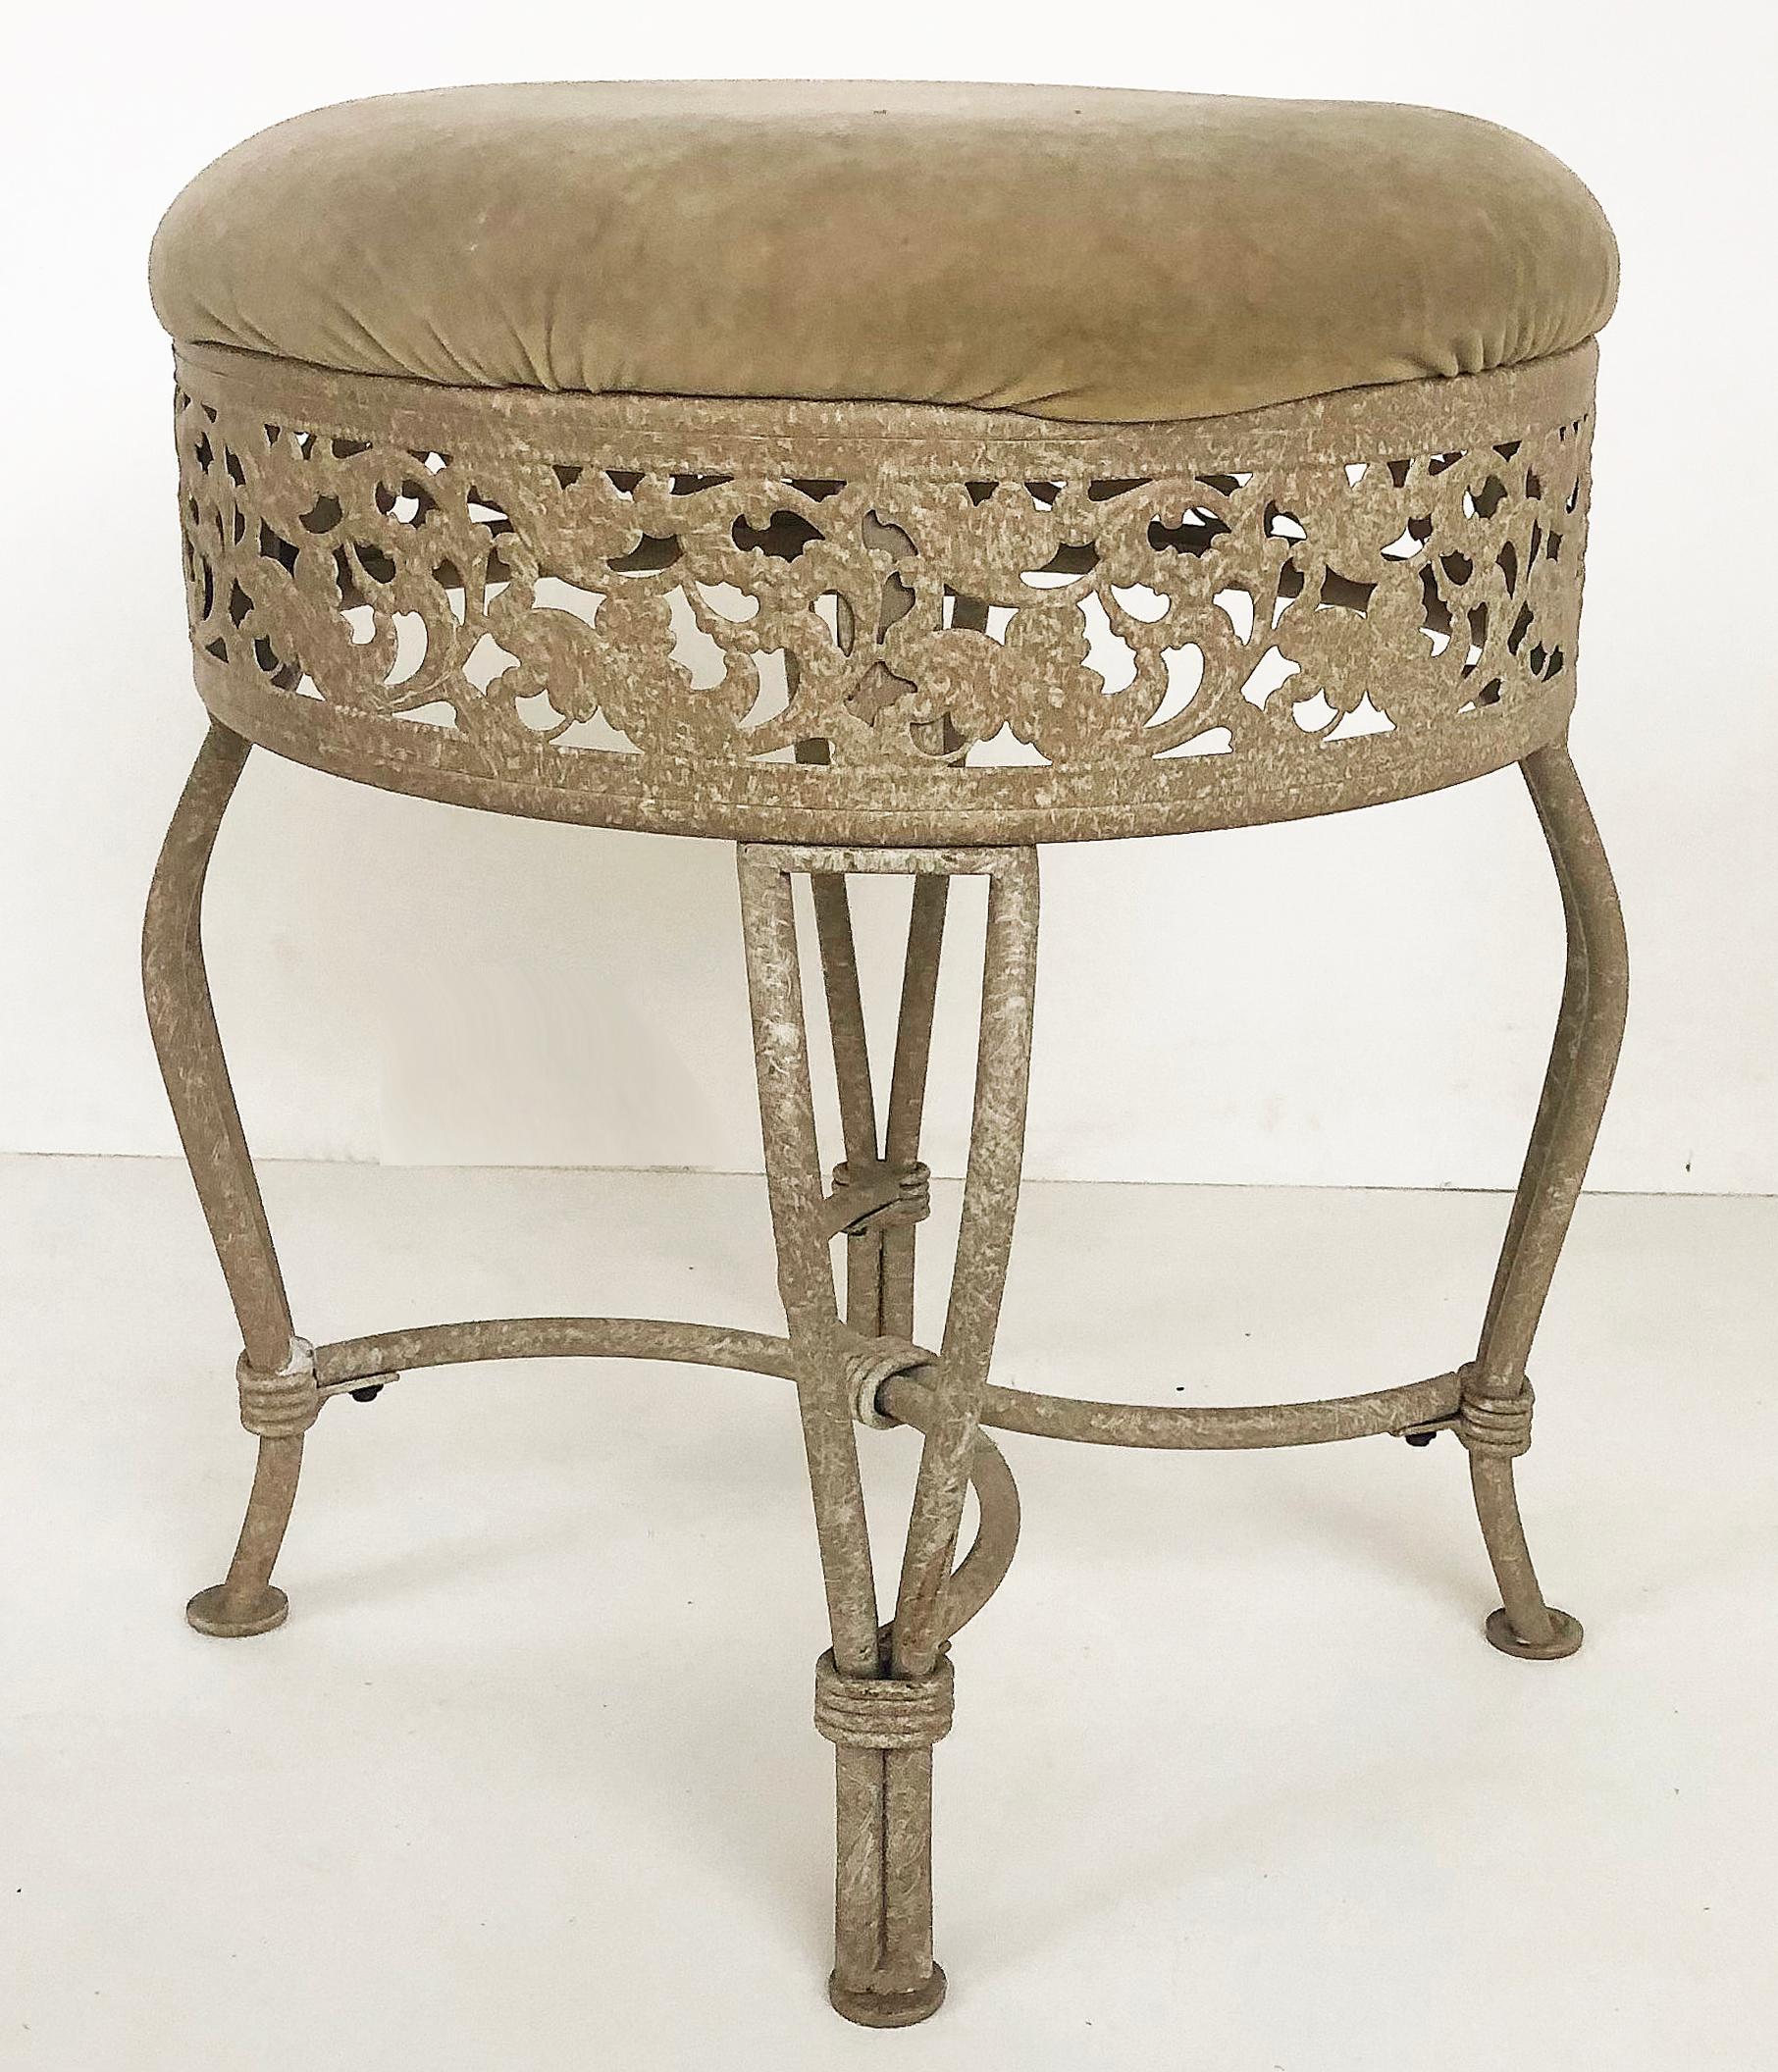 Cast Pierced Wrought Iron Painted Upholstered Low Stool, As-Found Upholstery For Sale